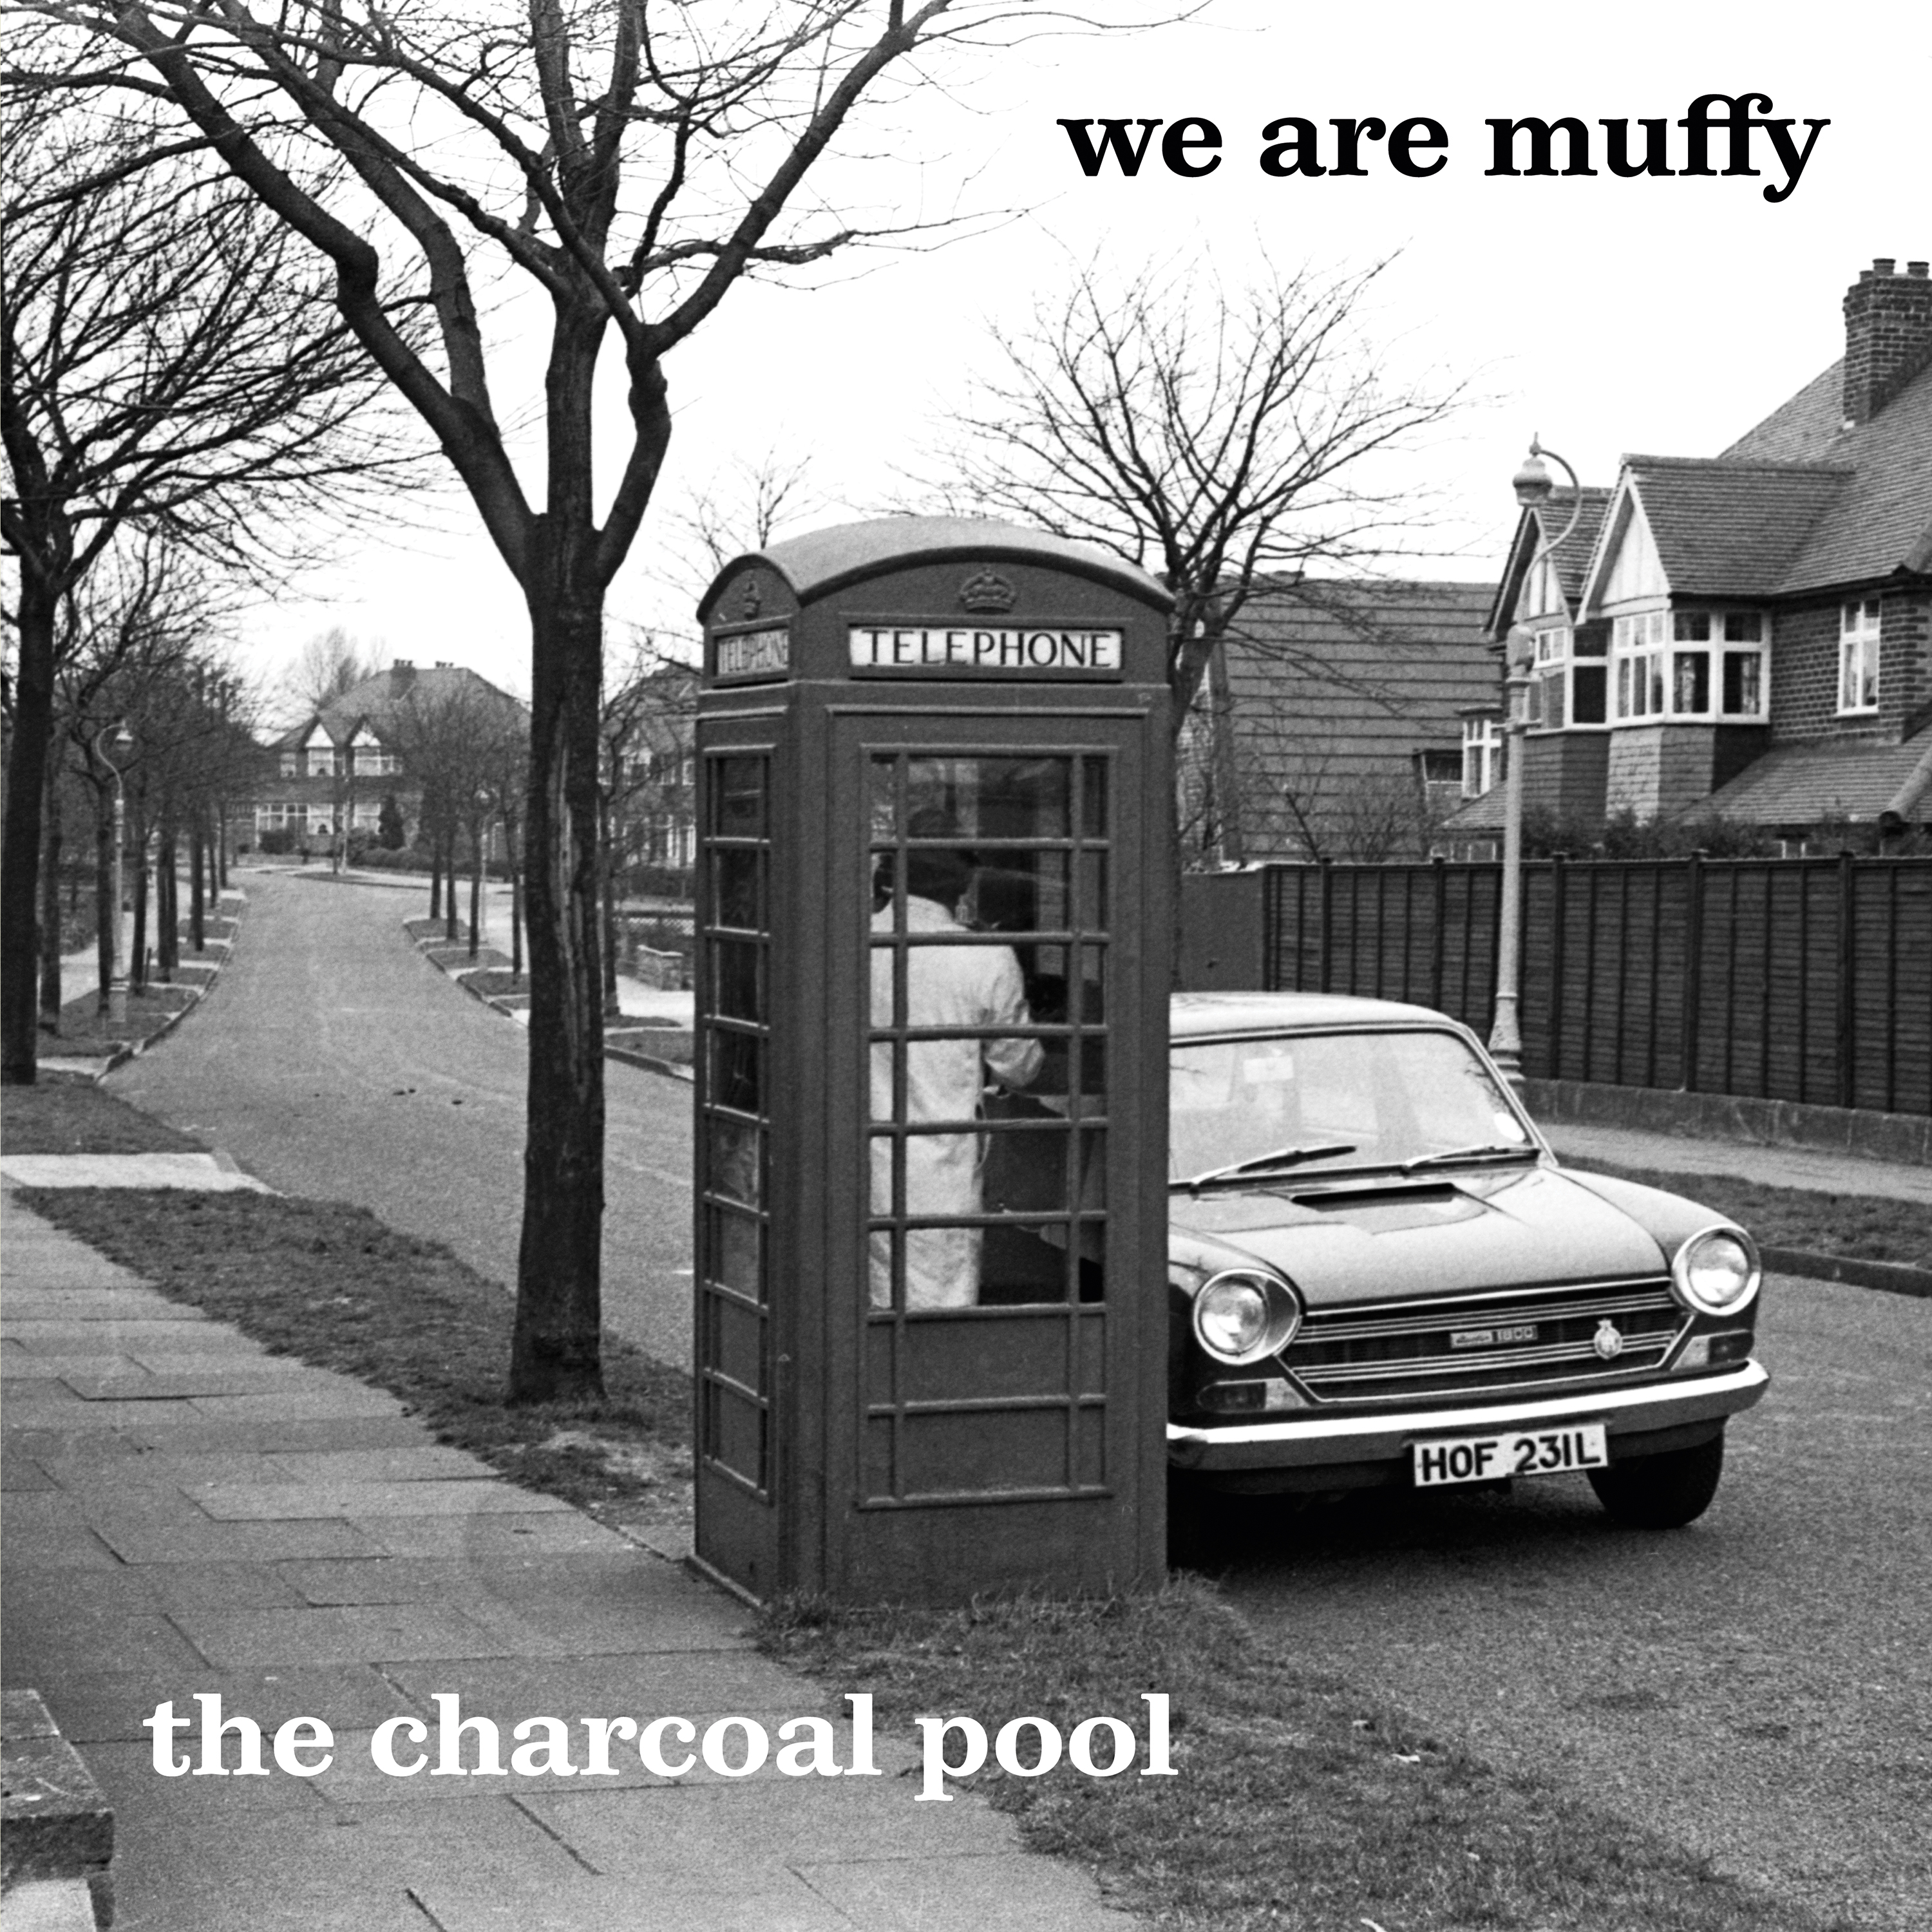 We Are Muffy - The Charcoal Pool